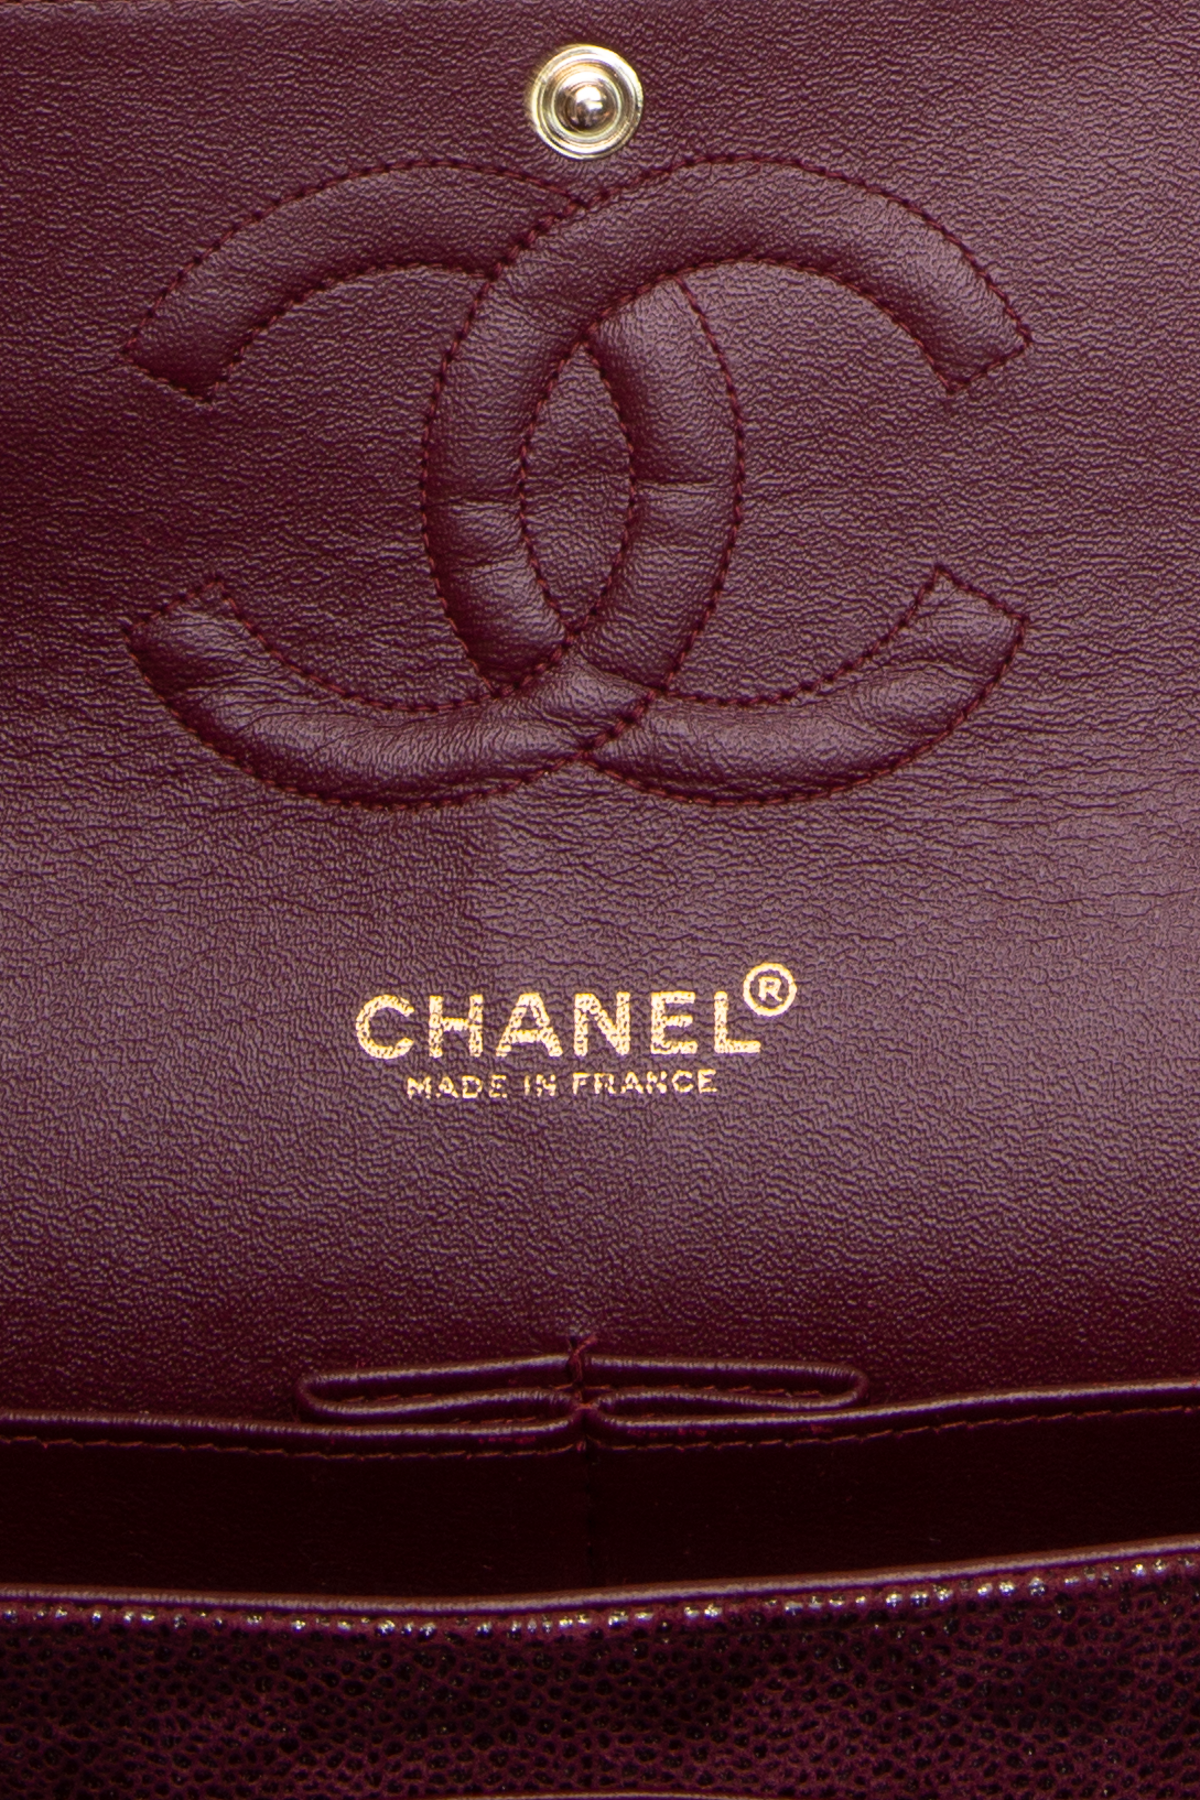 When in France #chanel